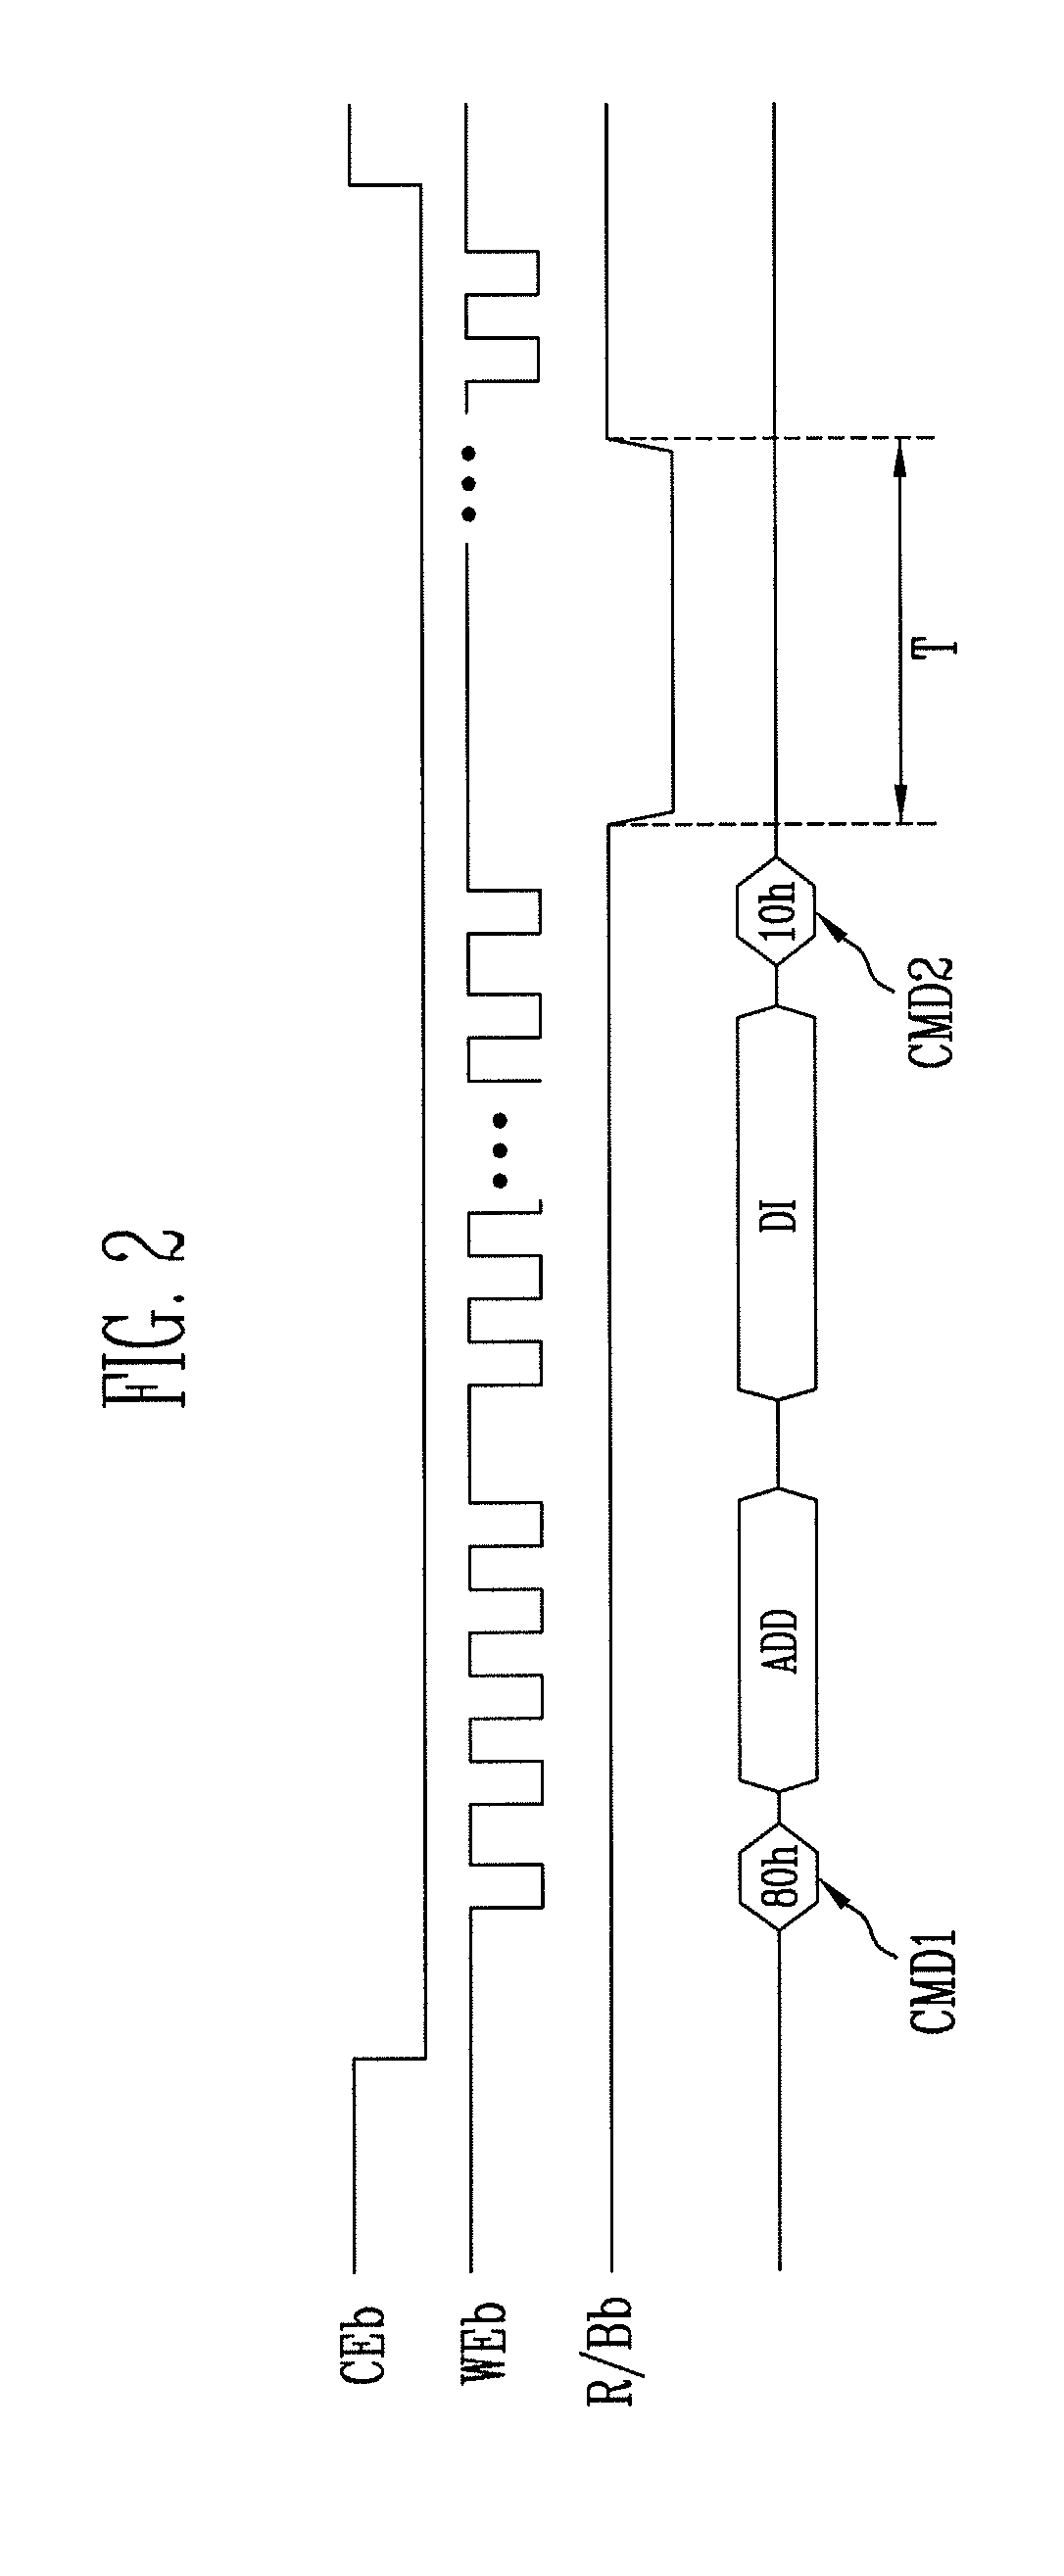 Multi-plane type flash memory and methods of controlling program and read operations thereof